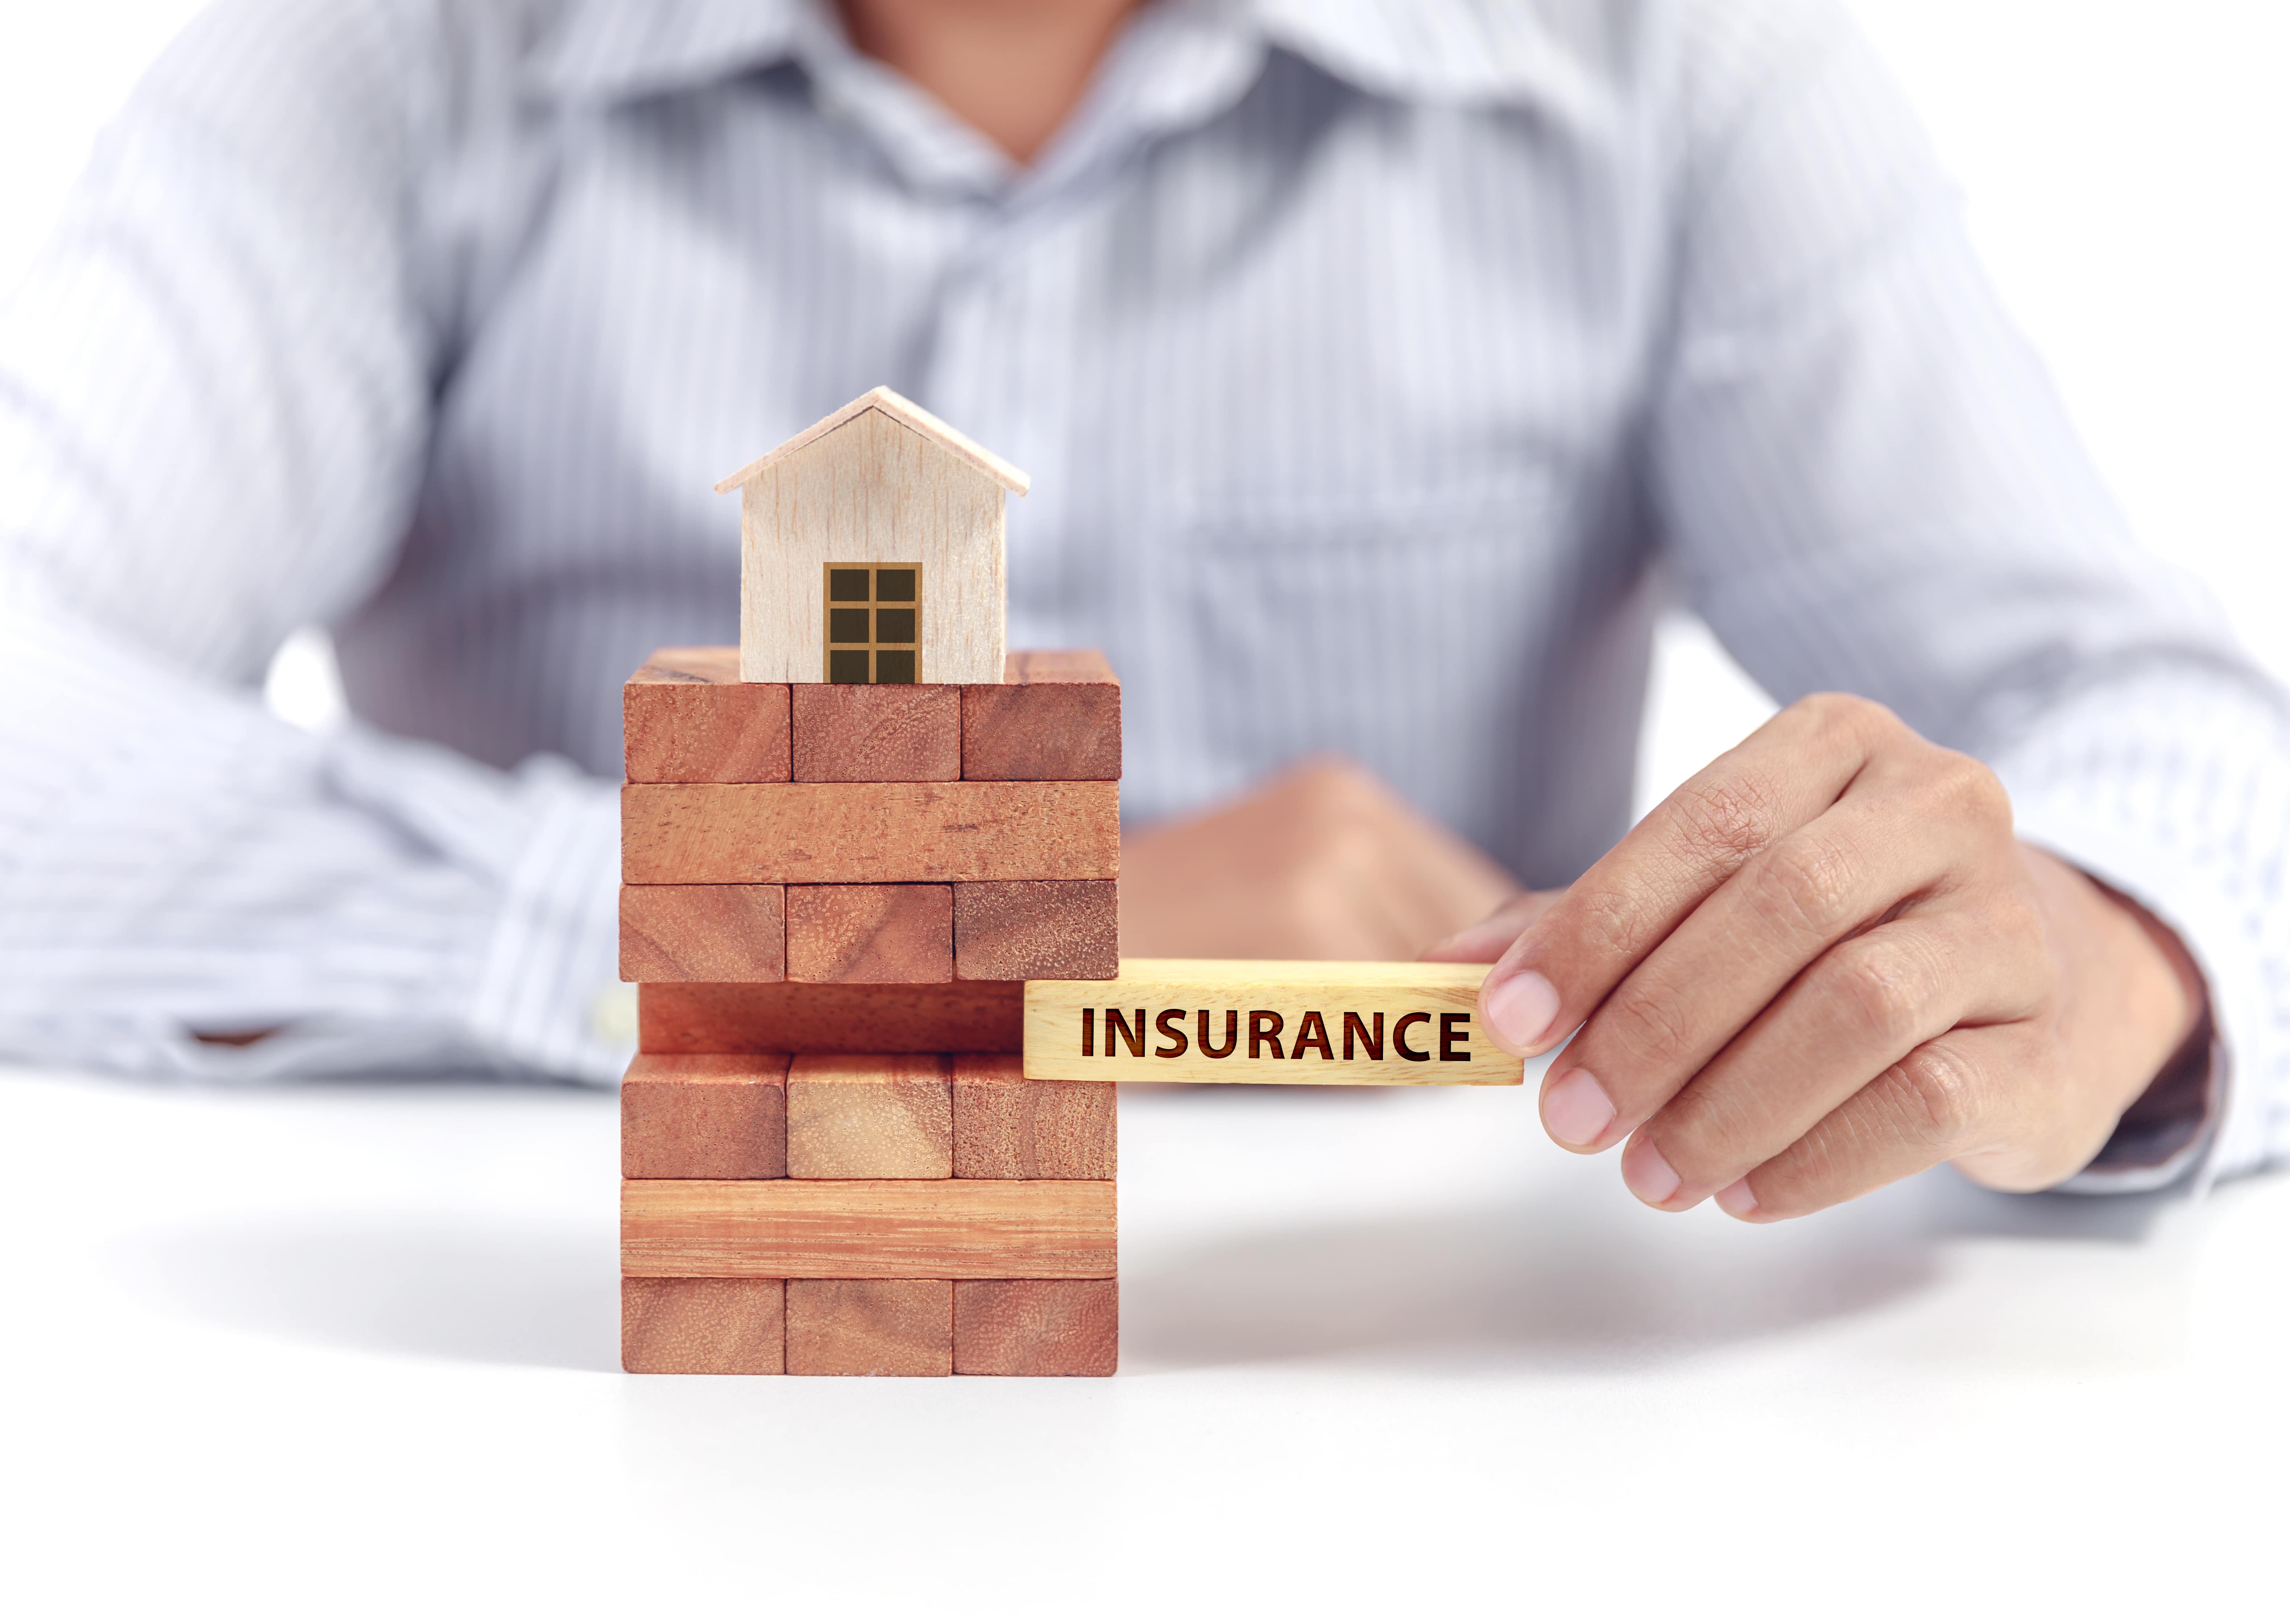 Buying a New Home? Don't Forget Home Insurance